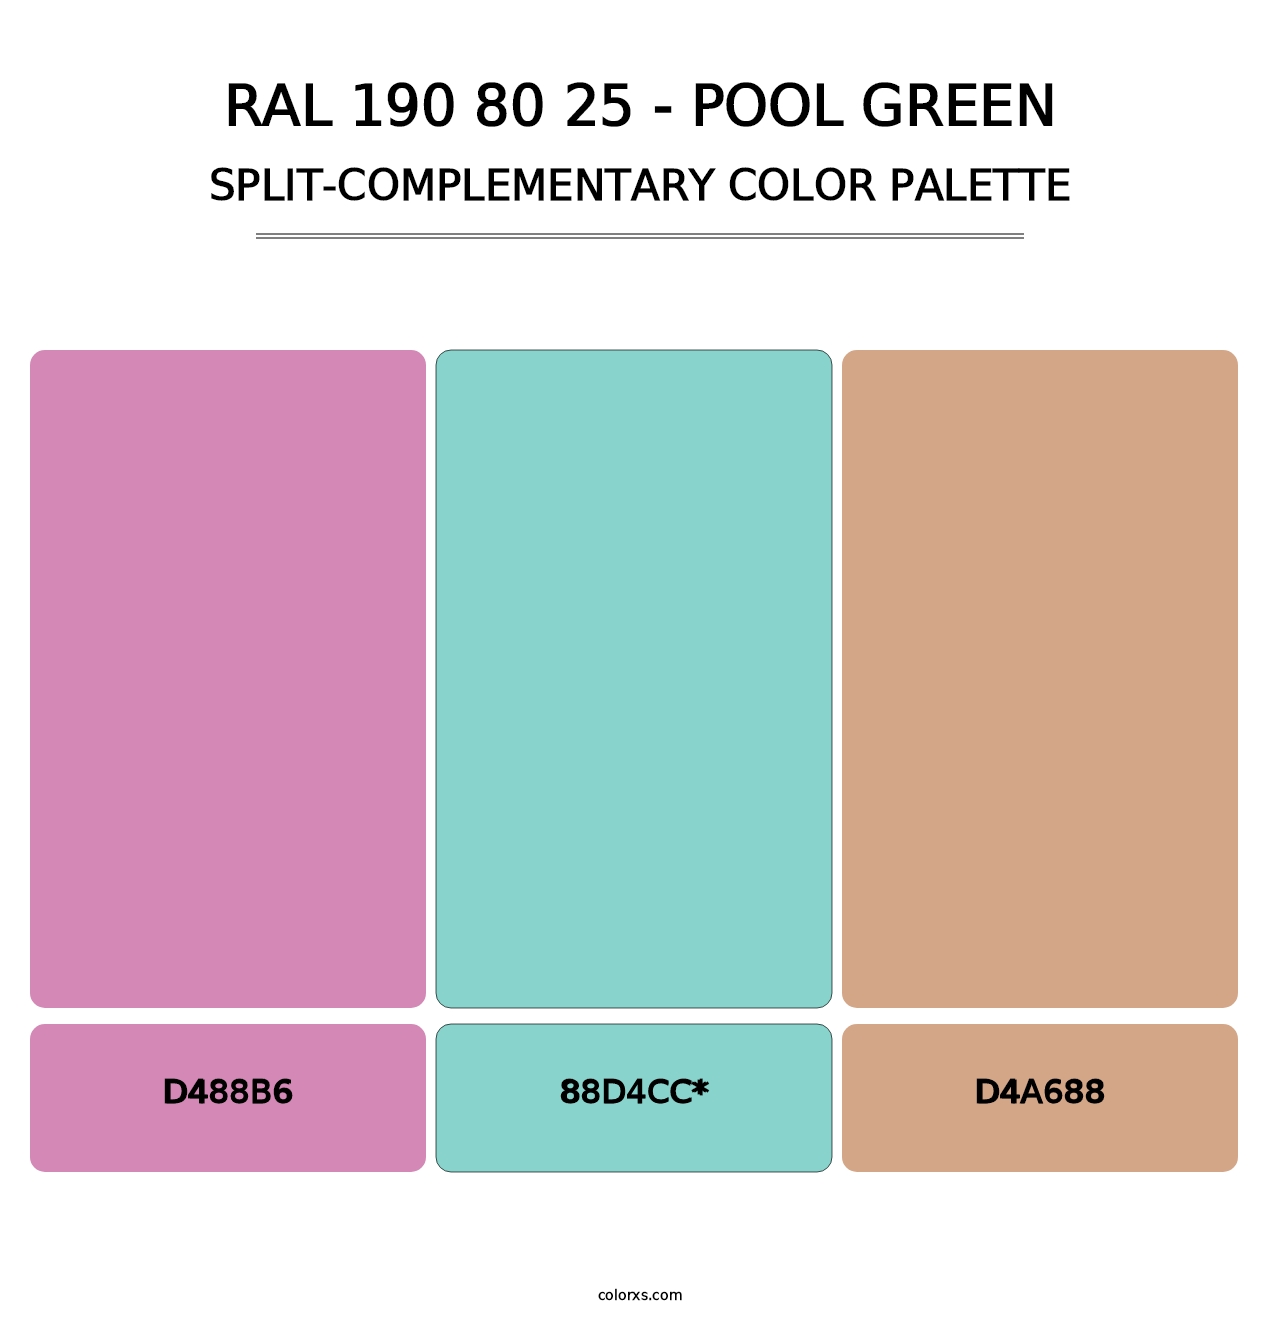 RAL 190 80 25 - Pool Green - Split-Complementary Color Palette